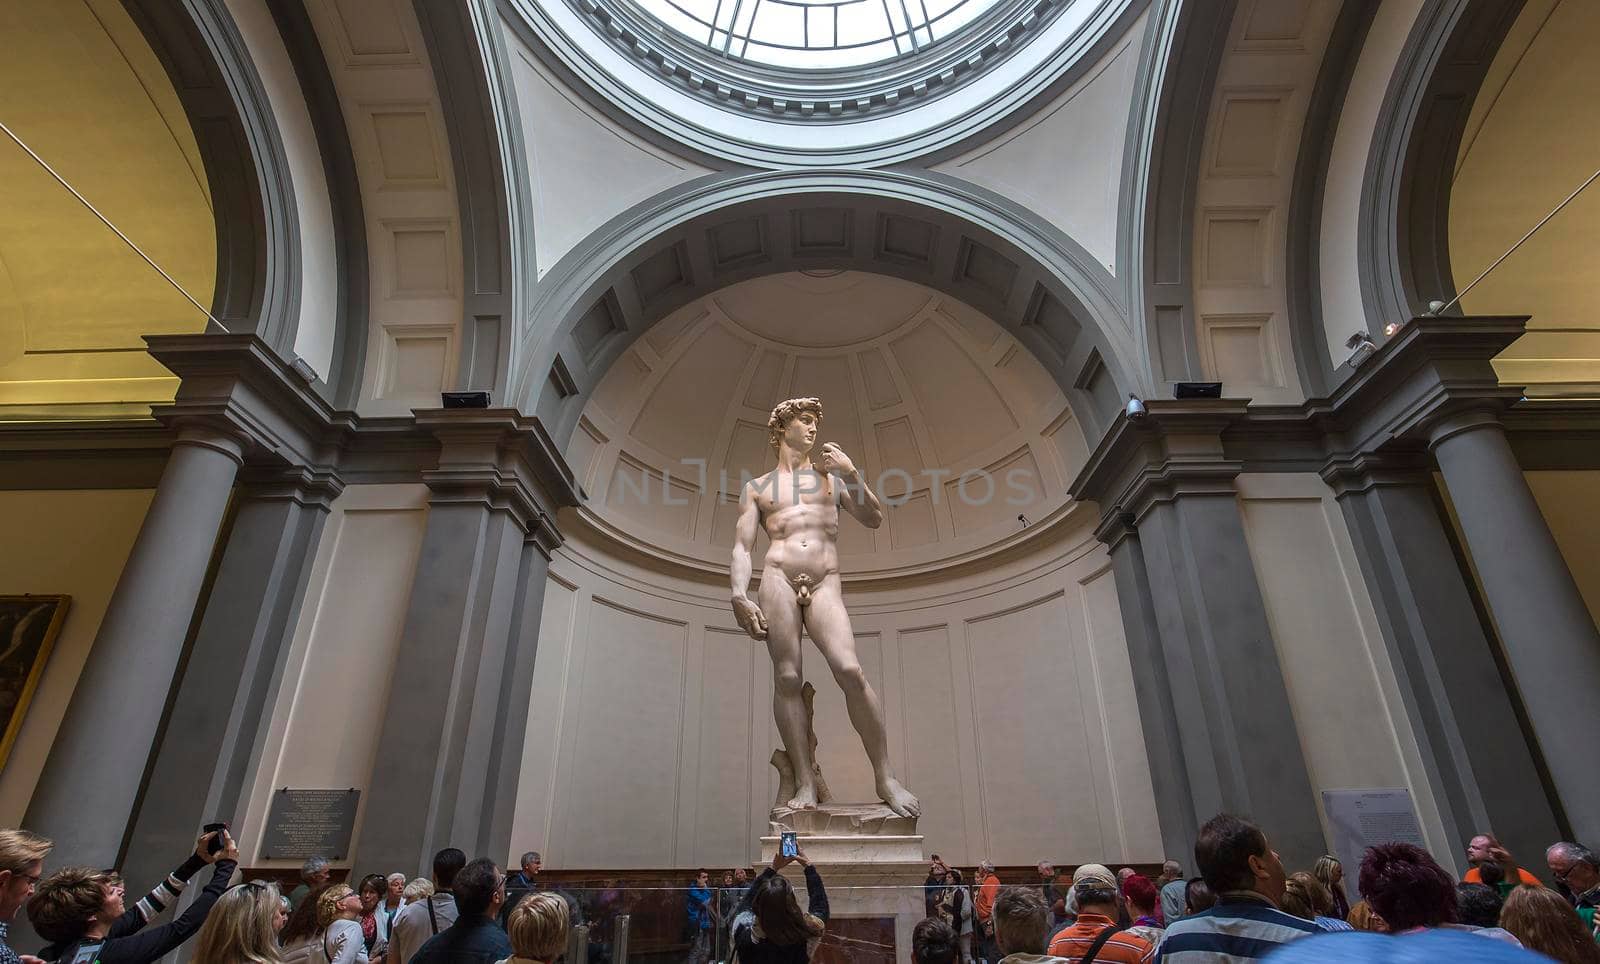 Michelangelo David statue in Accademia, Florence, Italy by photogolfer